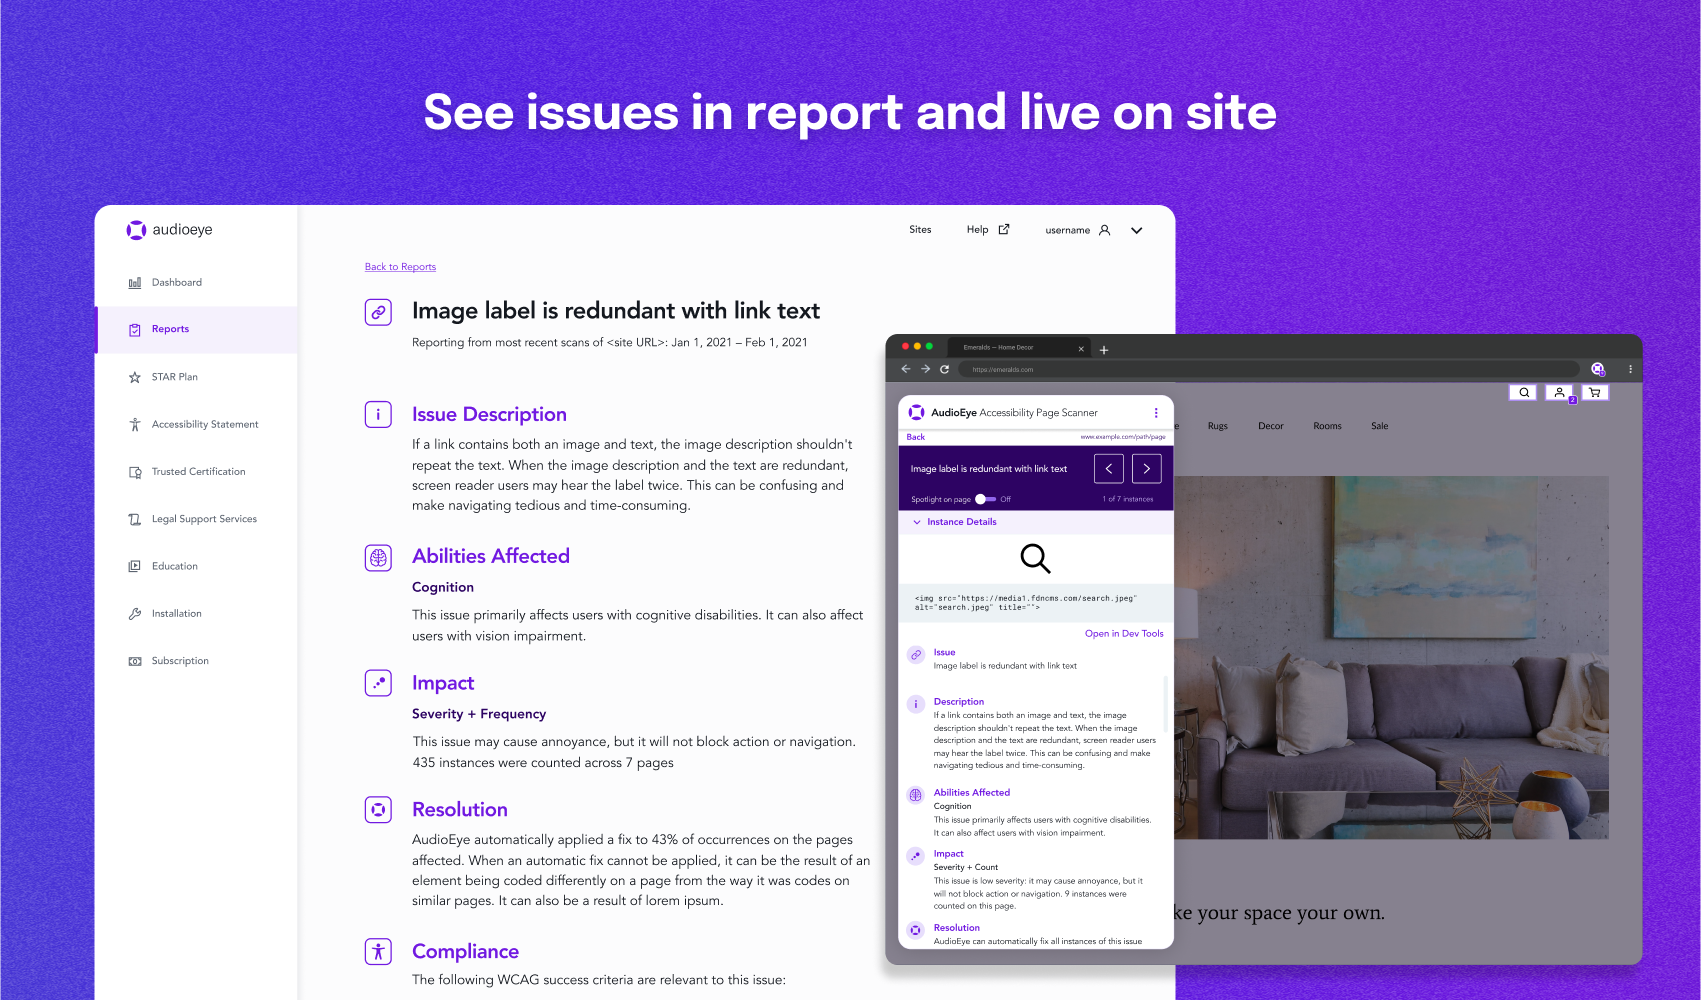 See issues in report and live on your site